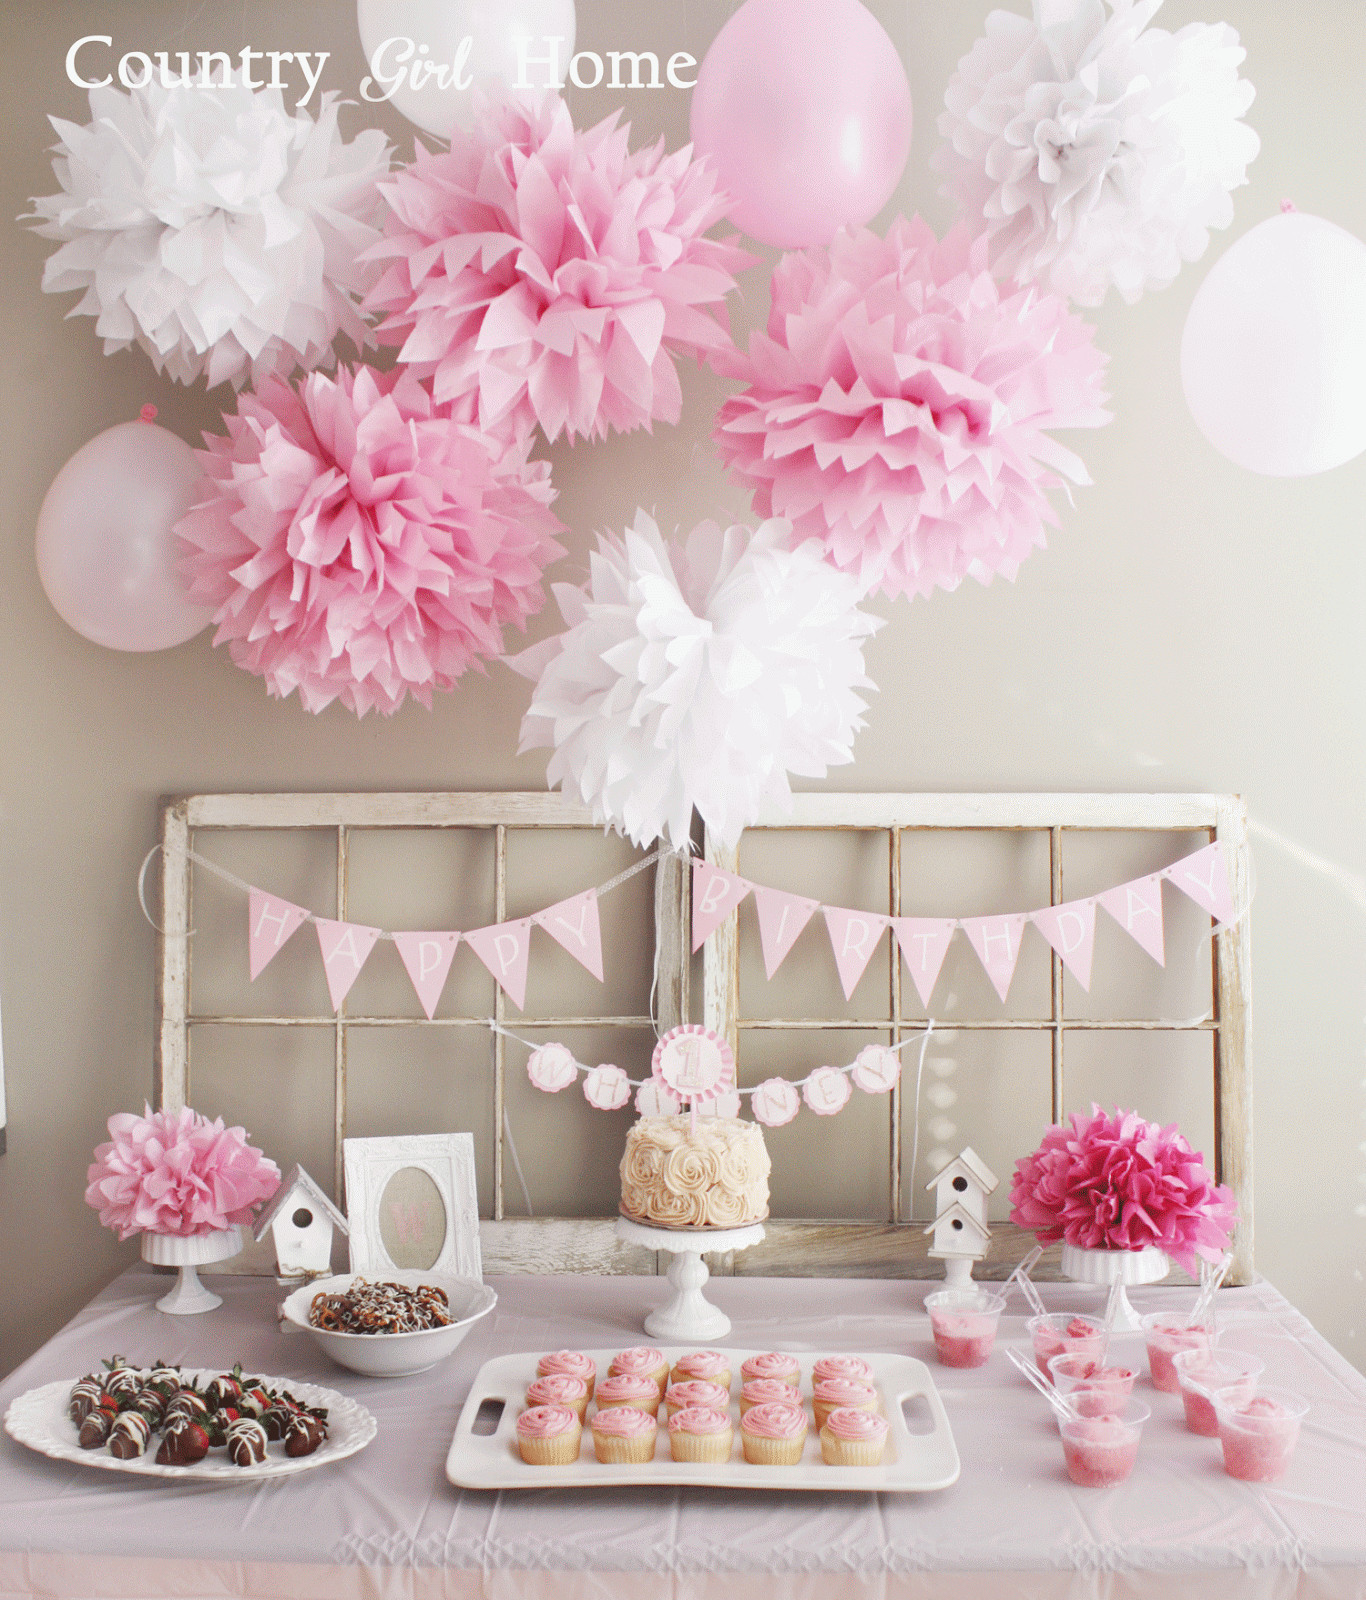 1st Birthday Decorations For Girl
 COUNTRY GIRL HOME Parties